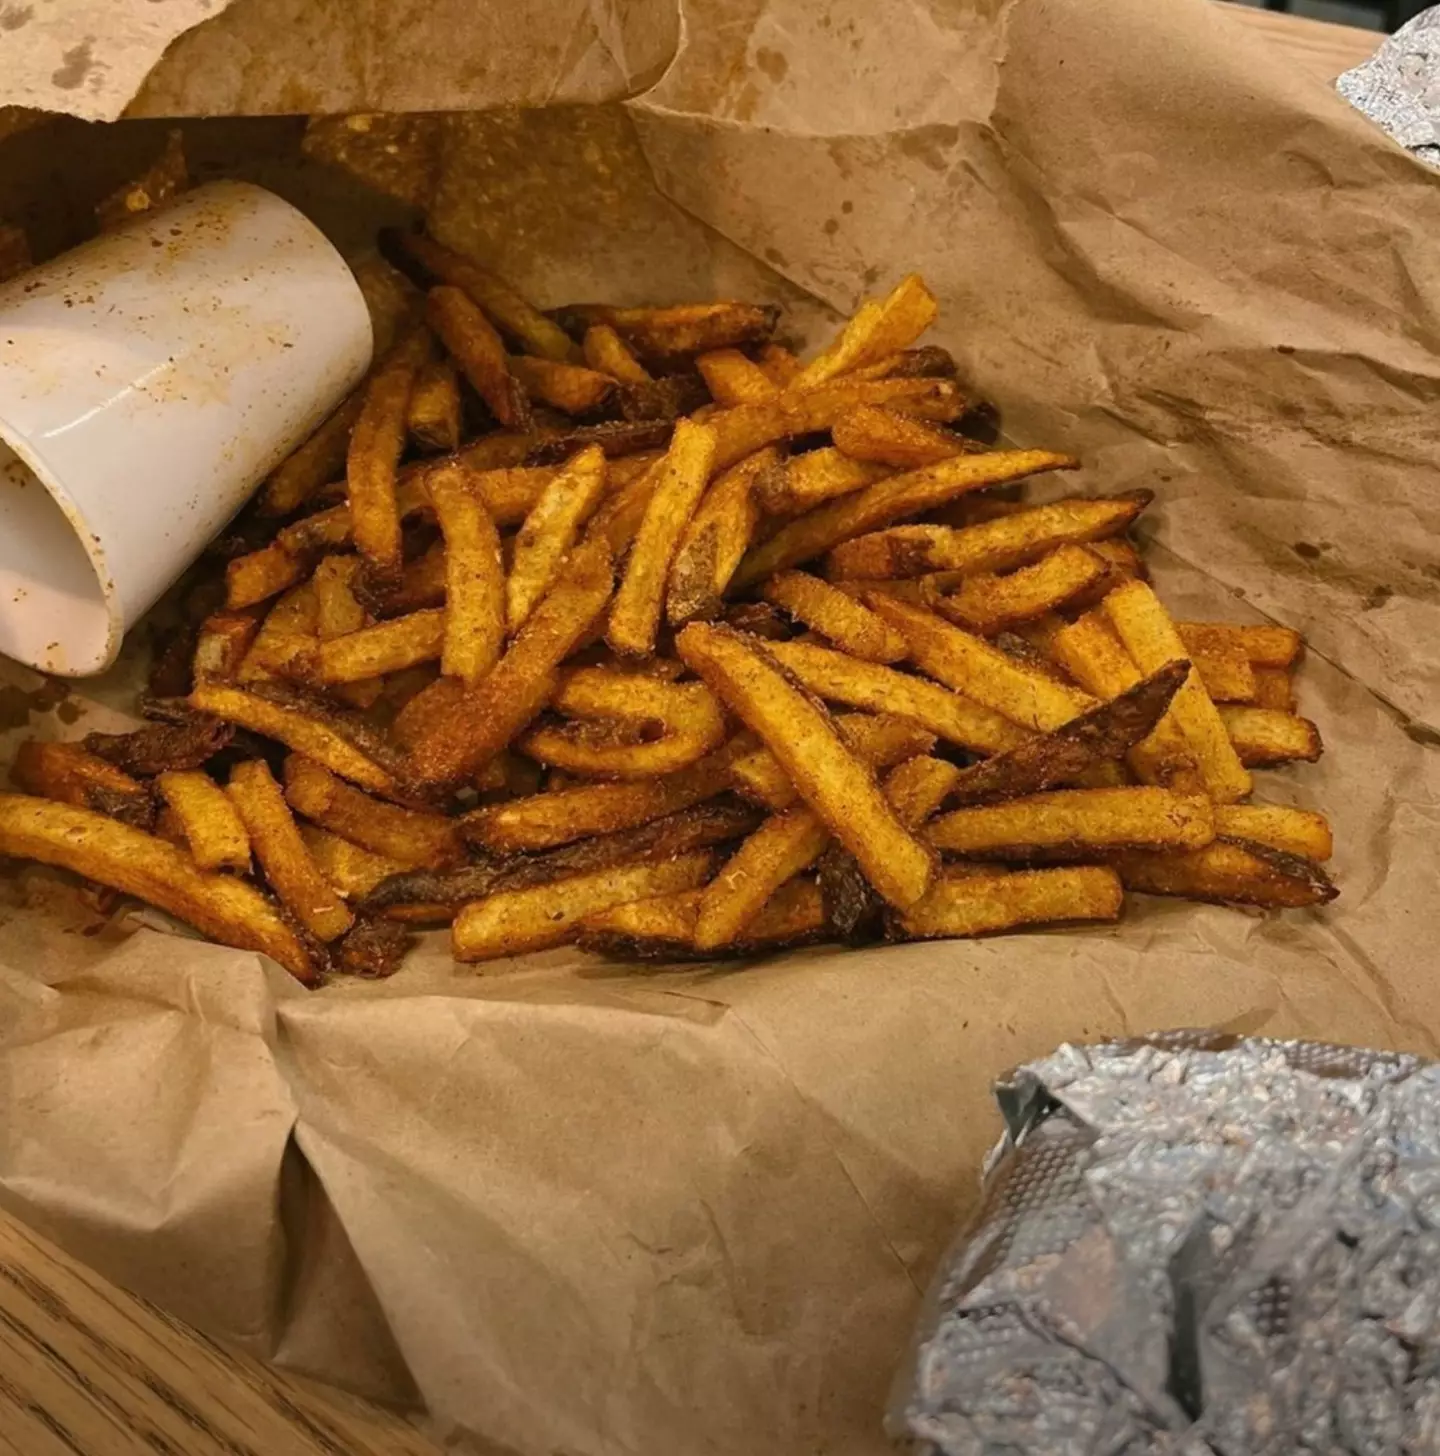 Five Guys always give you a hearty helping of fries.